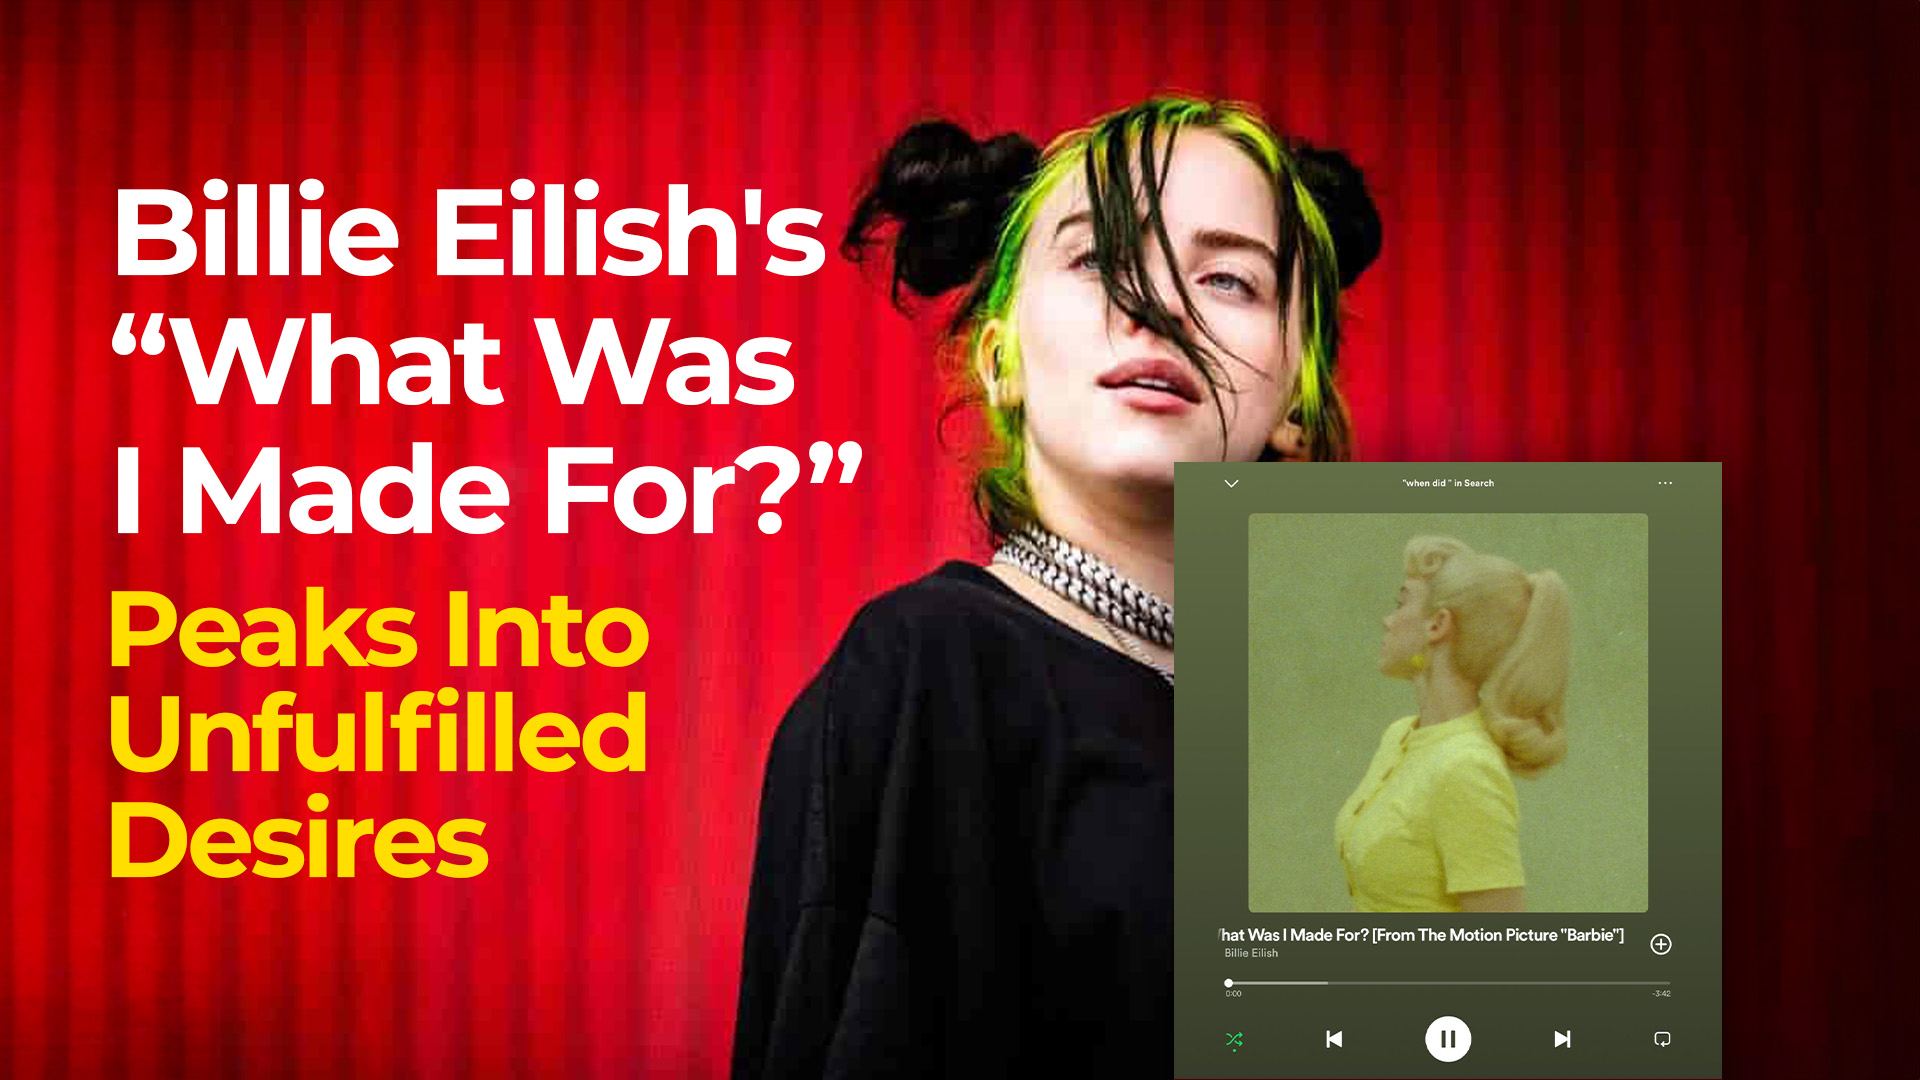 Billie Eilish's What Was I Made For? Unfulfilled Desires